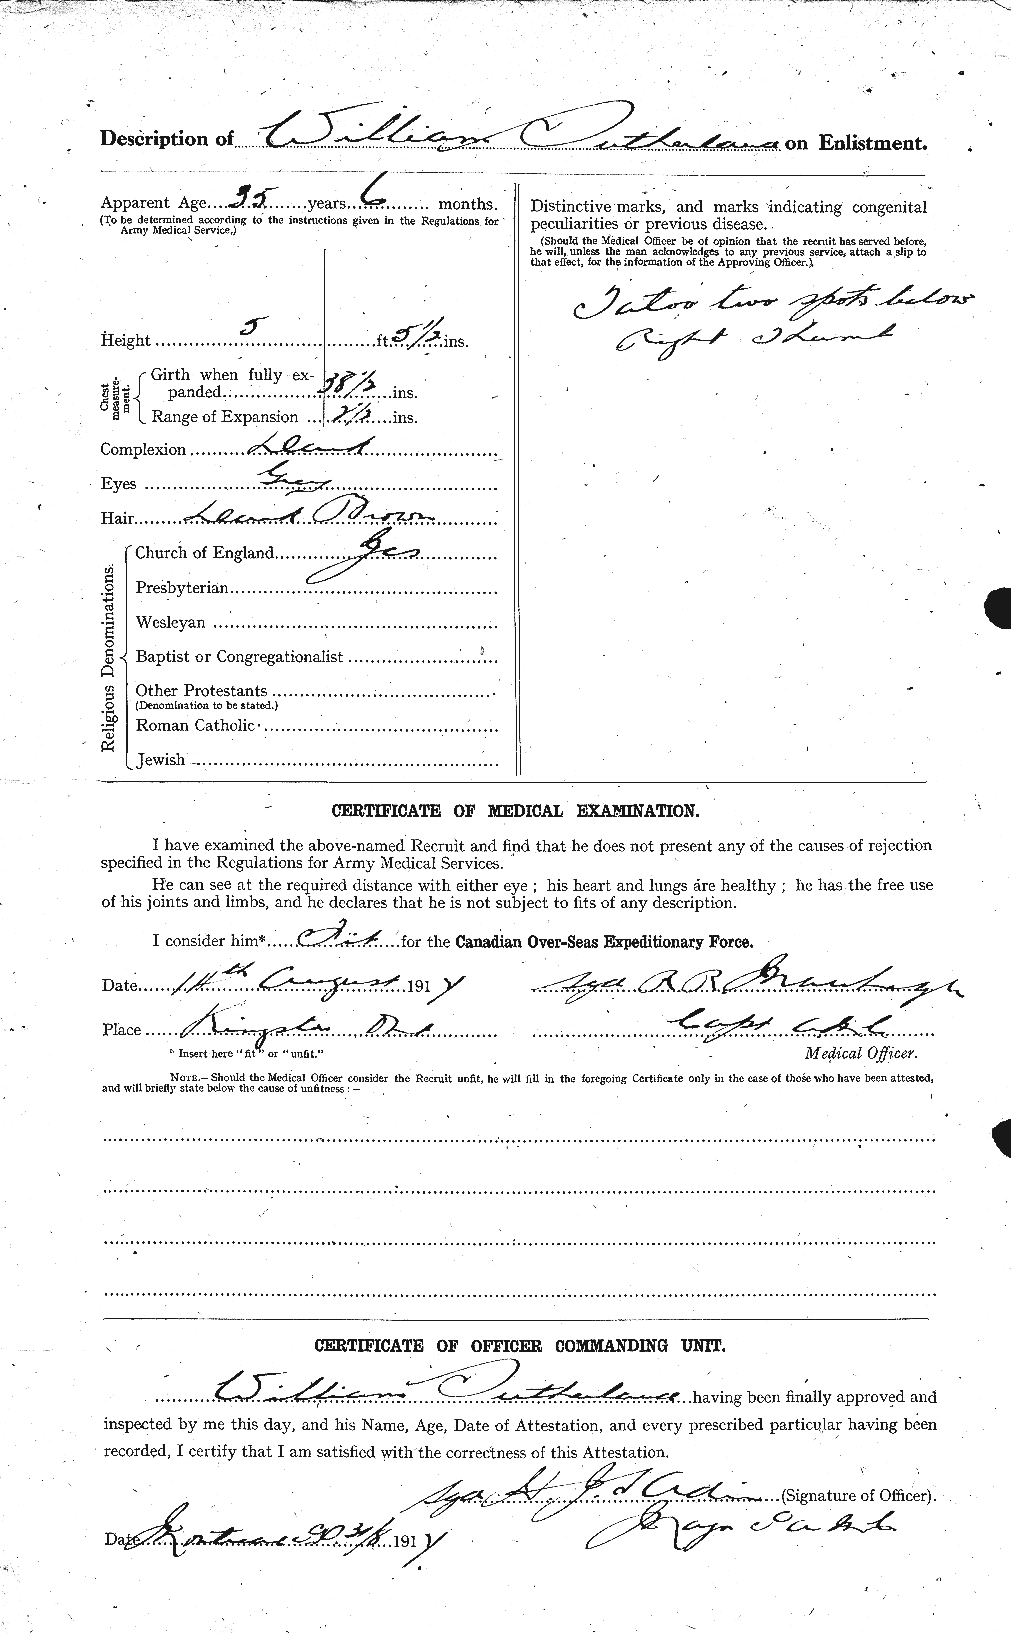 Personnel Records of the First World War - CEF 126454b